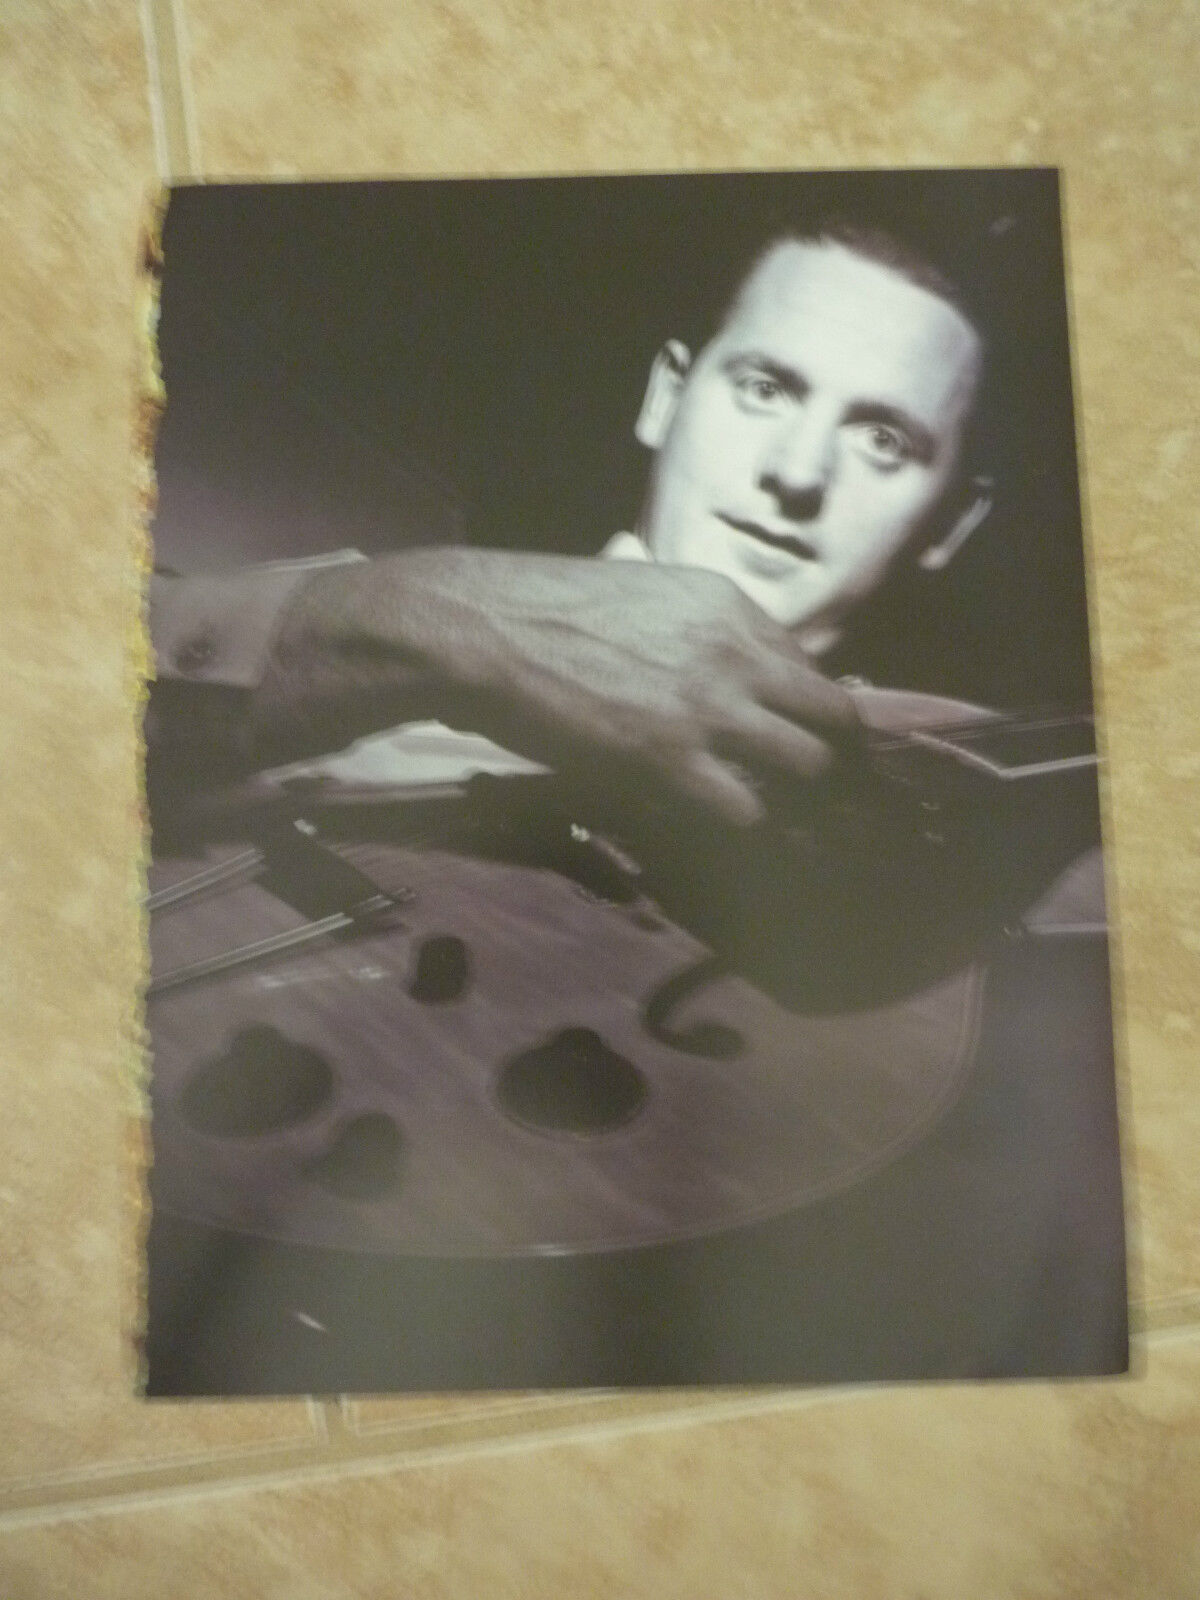 Les Paul Guitarist 12x9 Coffee Table Book Photo Poster painting Page